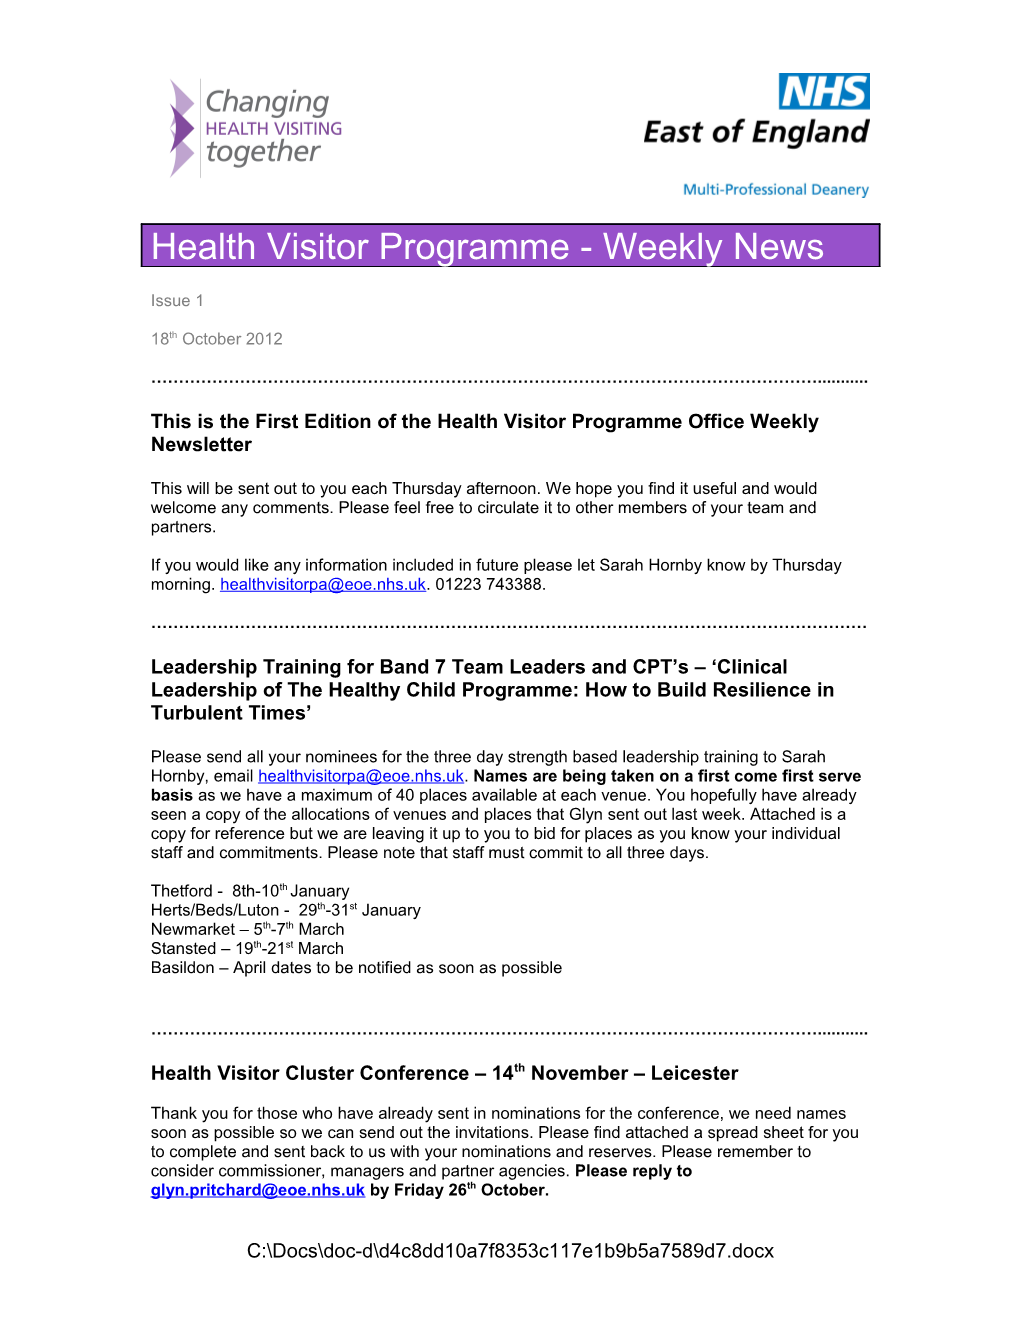 This Is the First Edition of the Health Visitor Programme Office Weekly Newsletter